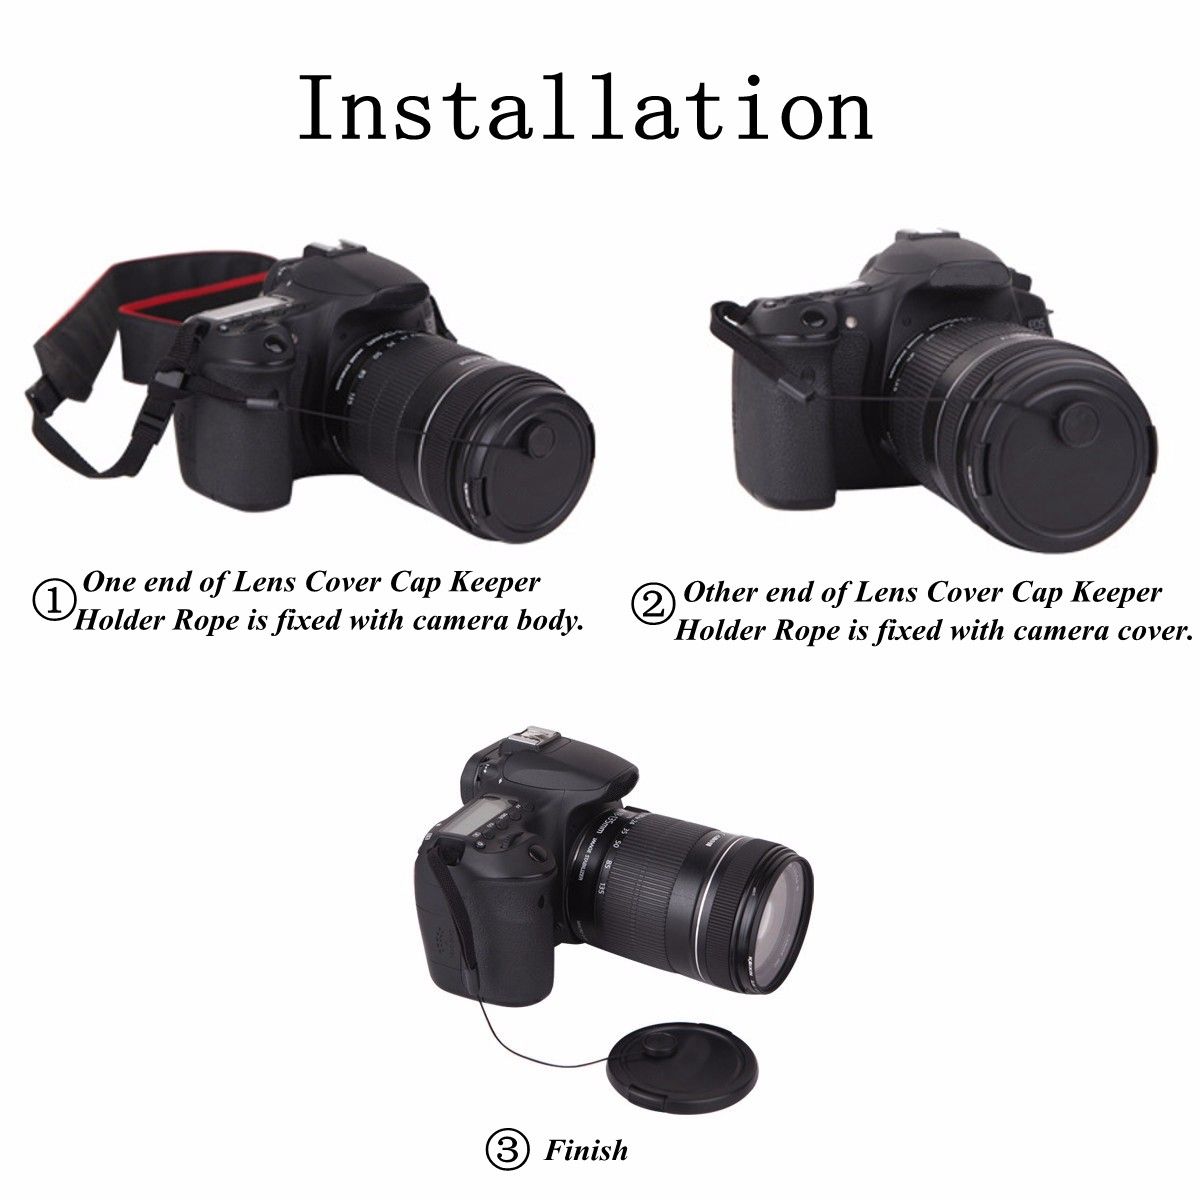 5Pcs-Lens-Cover-Keeper-Holder-Rope-for-Sony-for-Nikon-for-Canon-Camera-1155022